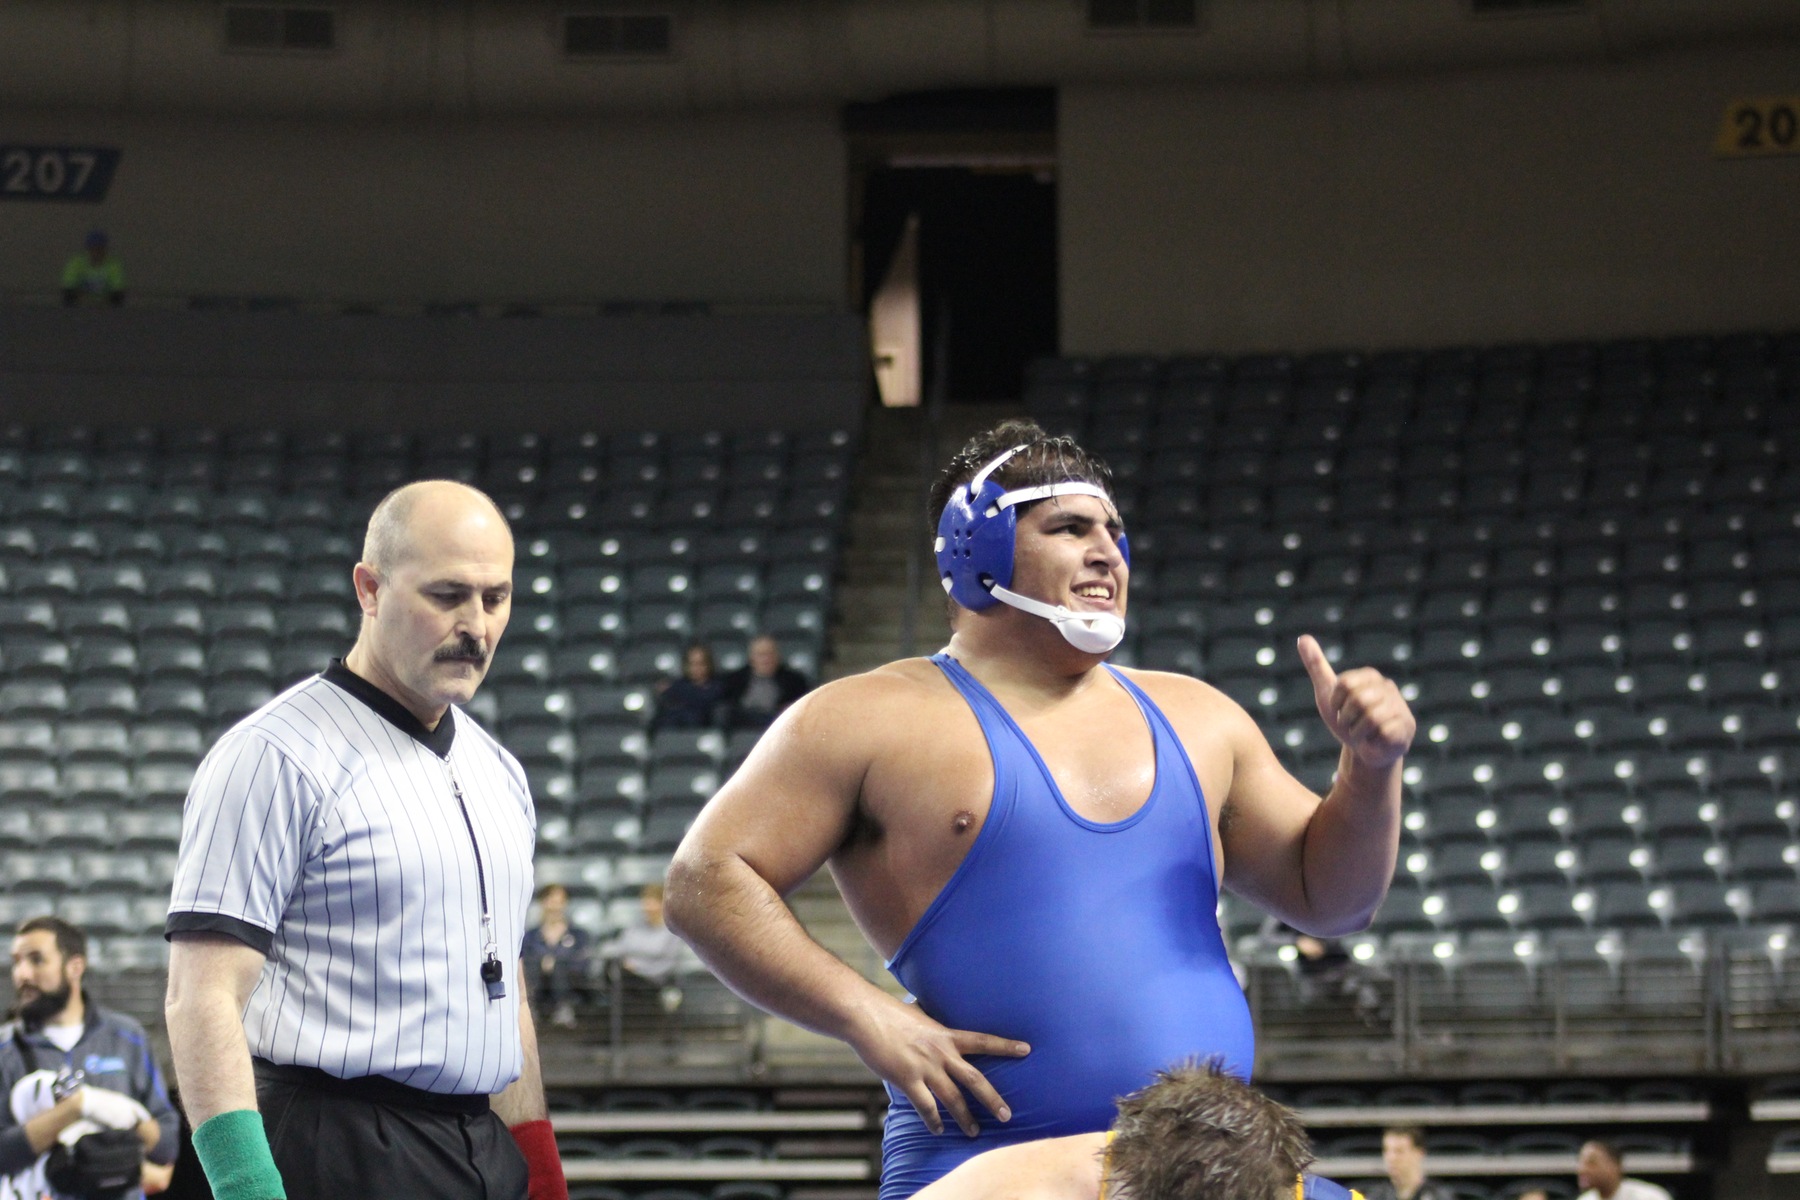 Mario Pena gives the thumbs up sign after winning his quarterfinal round match at 285 pounds Friday night.